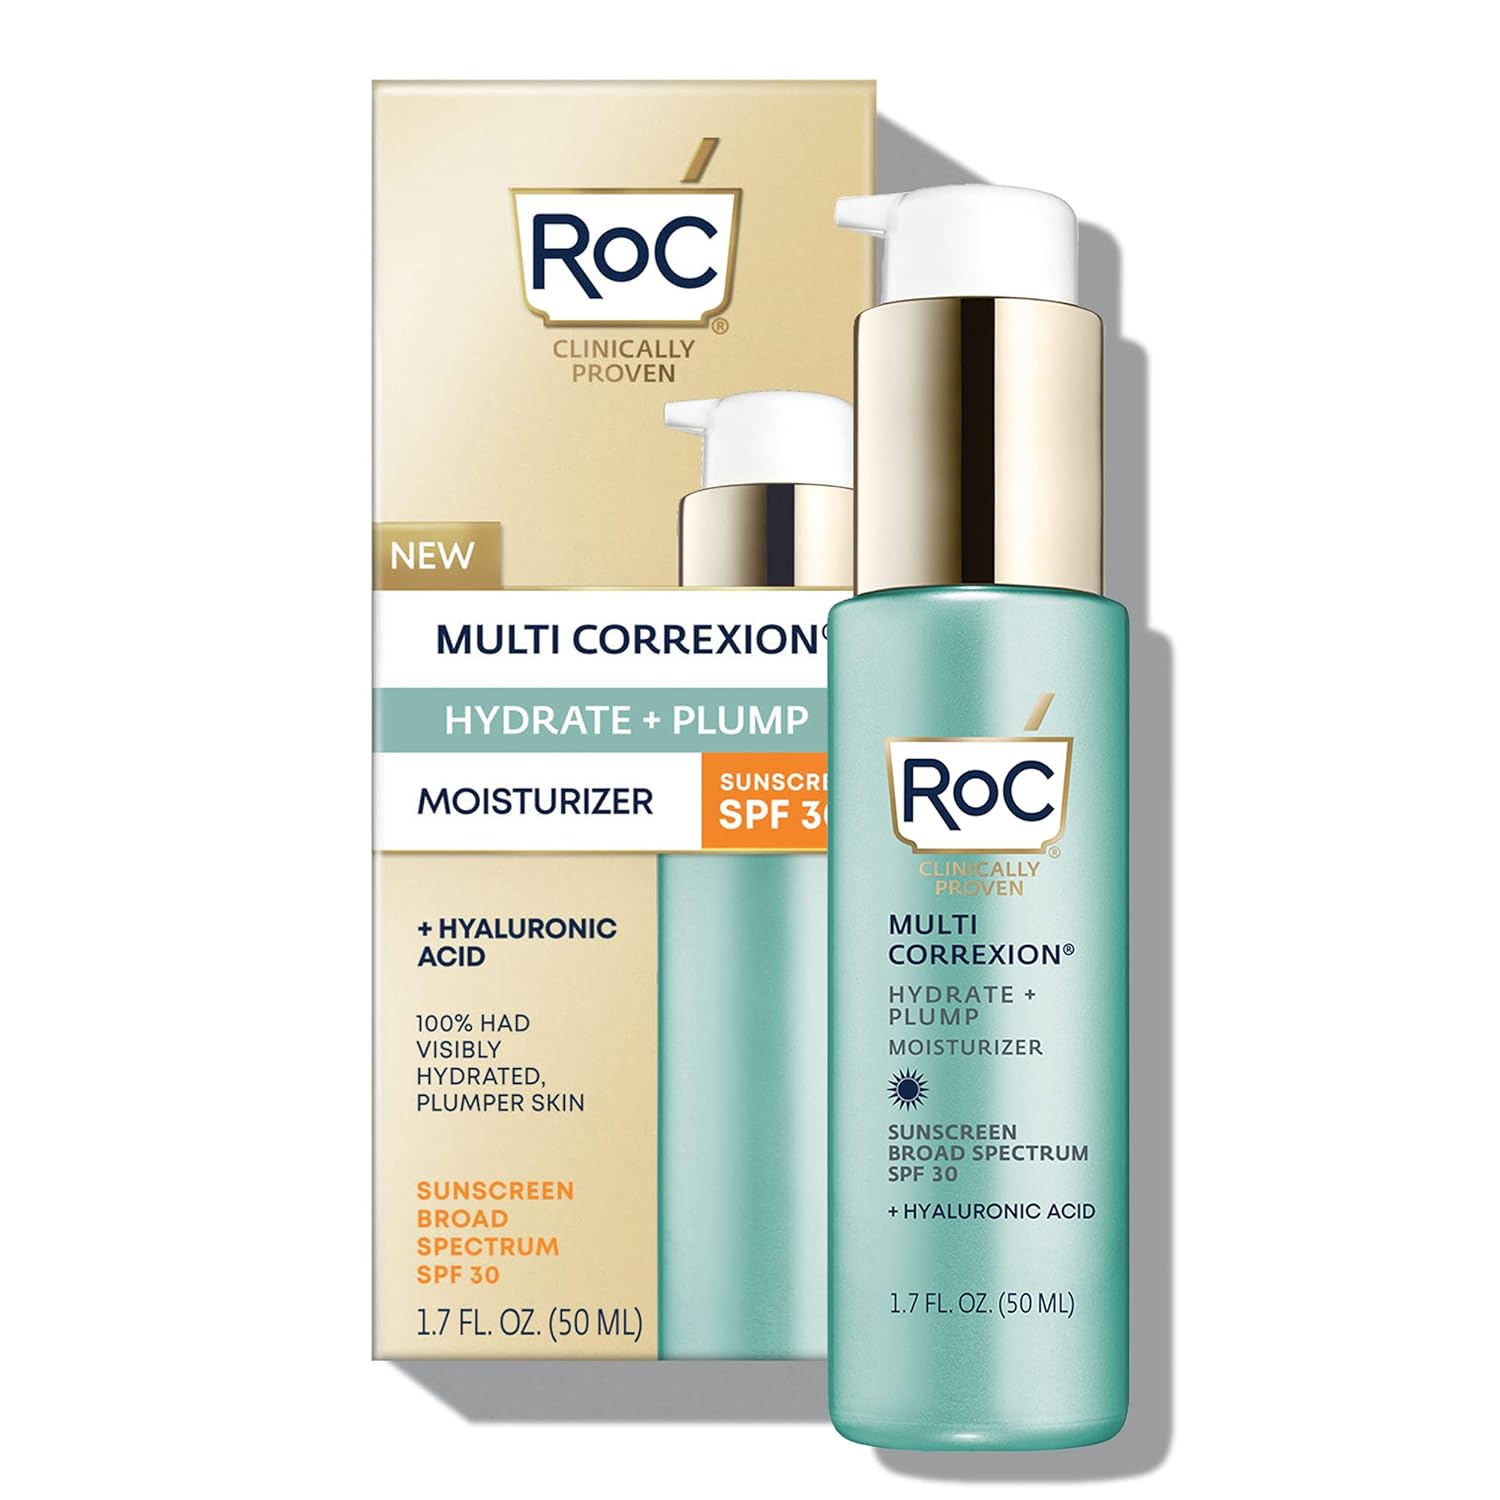 RoC Multi Correxion Hyaluronic Acid Anti Aging Daily Face Mo